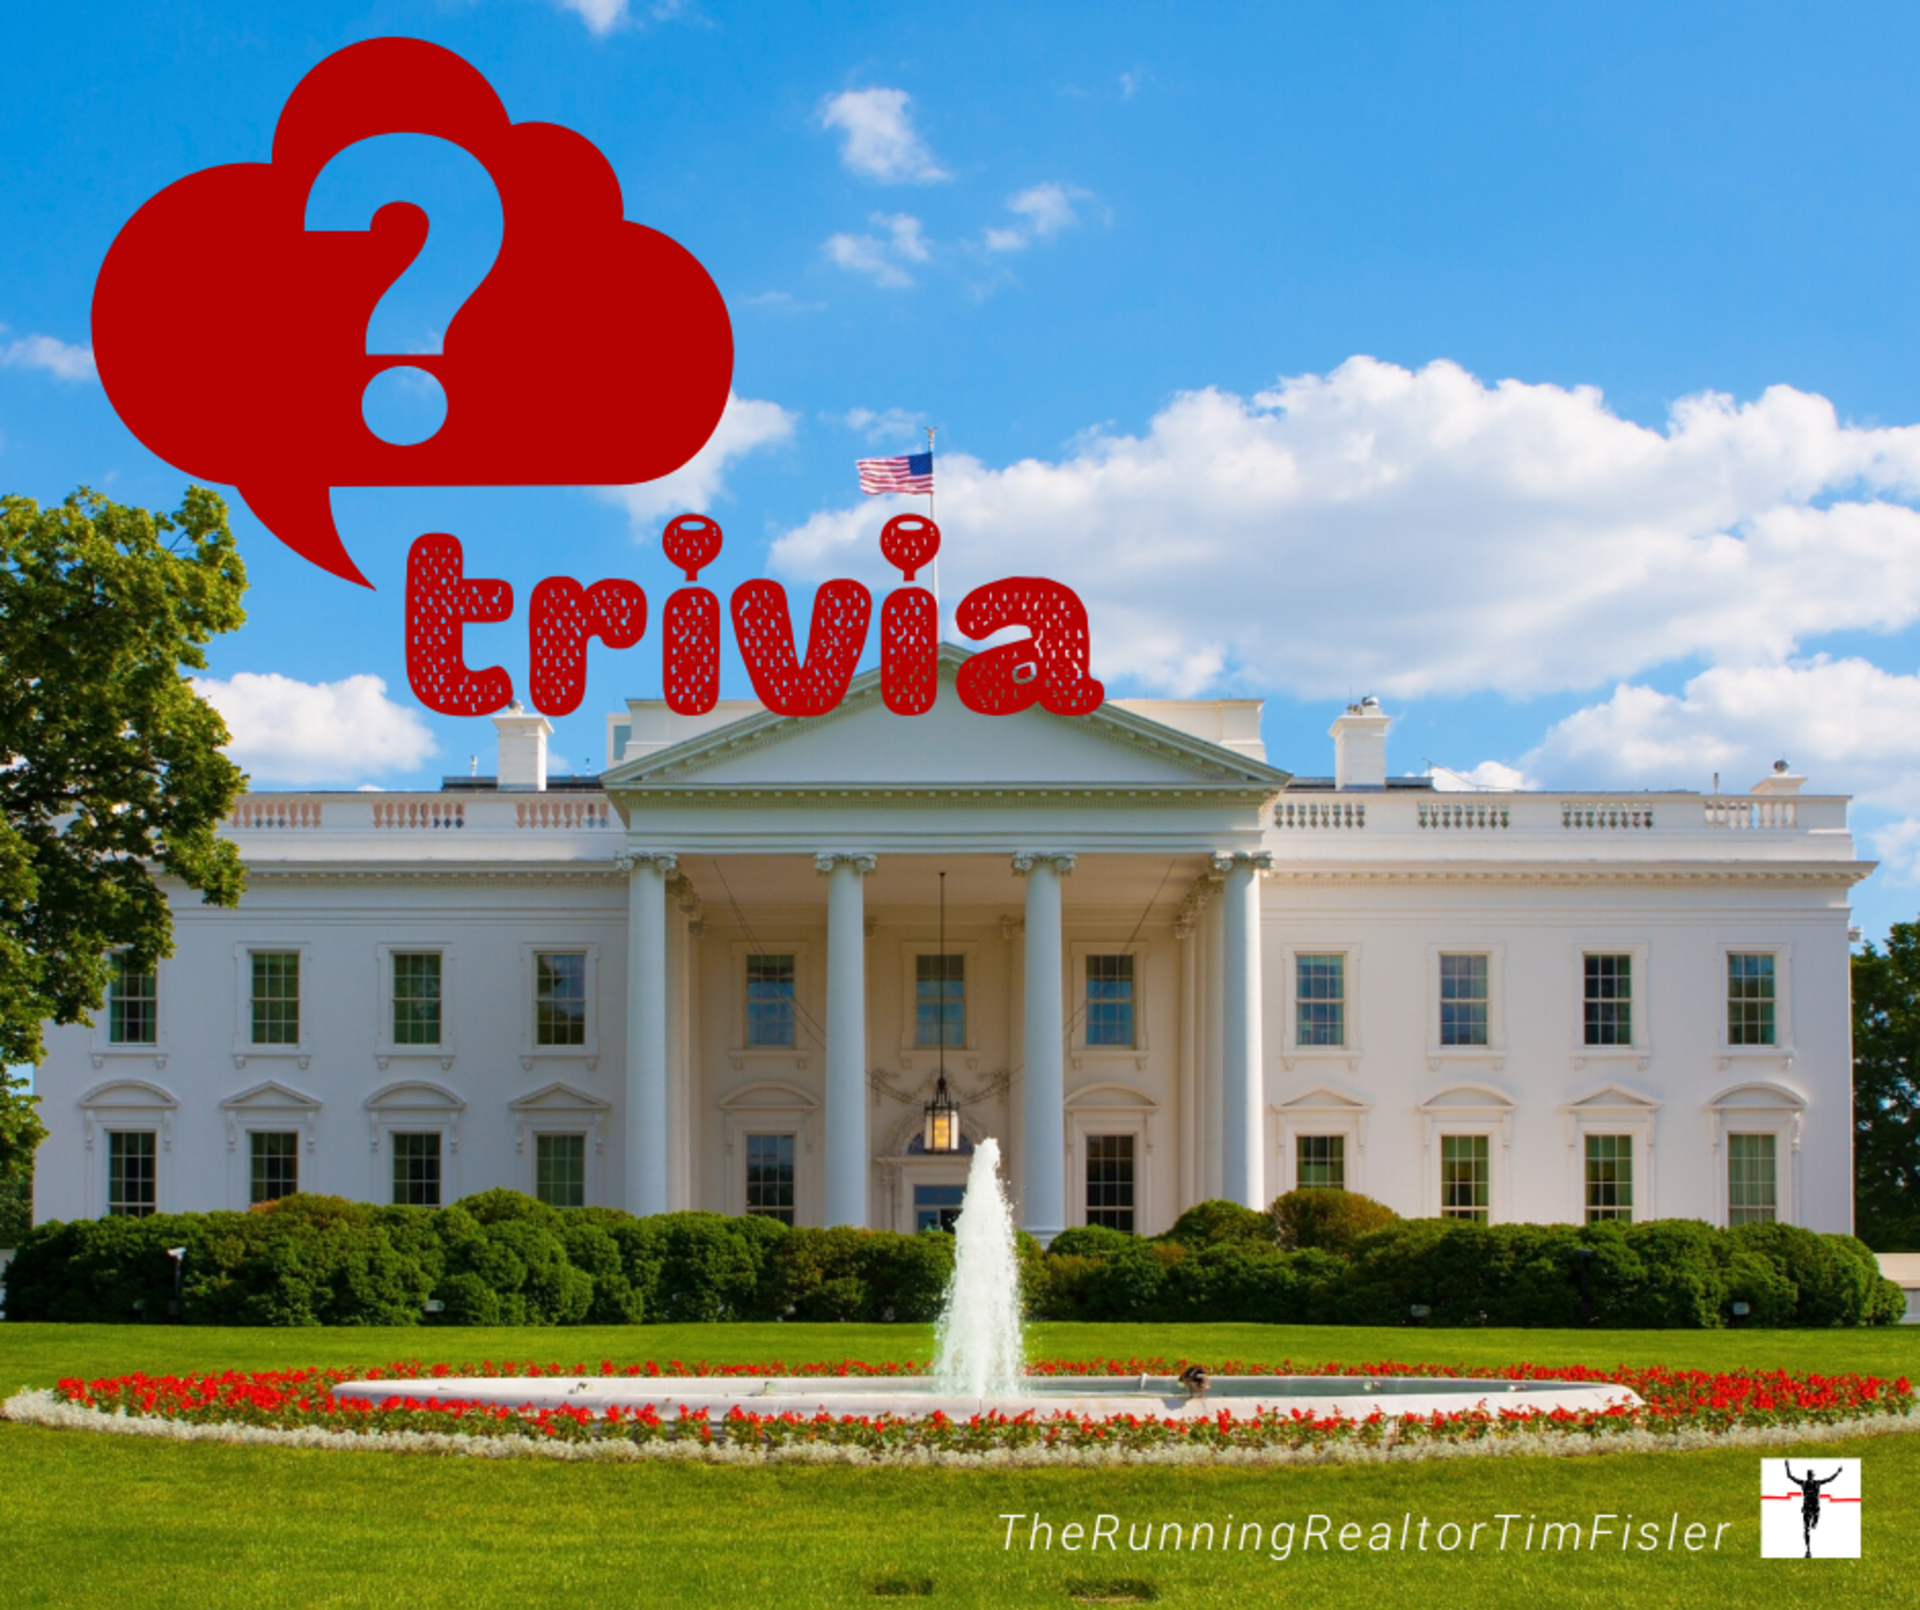 Trivia &#8211; What U.S. President popularized the phrase &#8220;the buck stops here&#8221;?